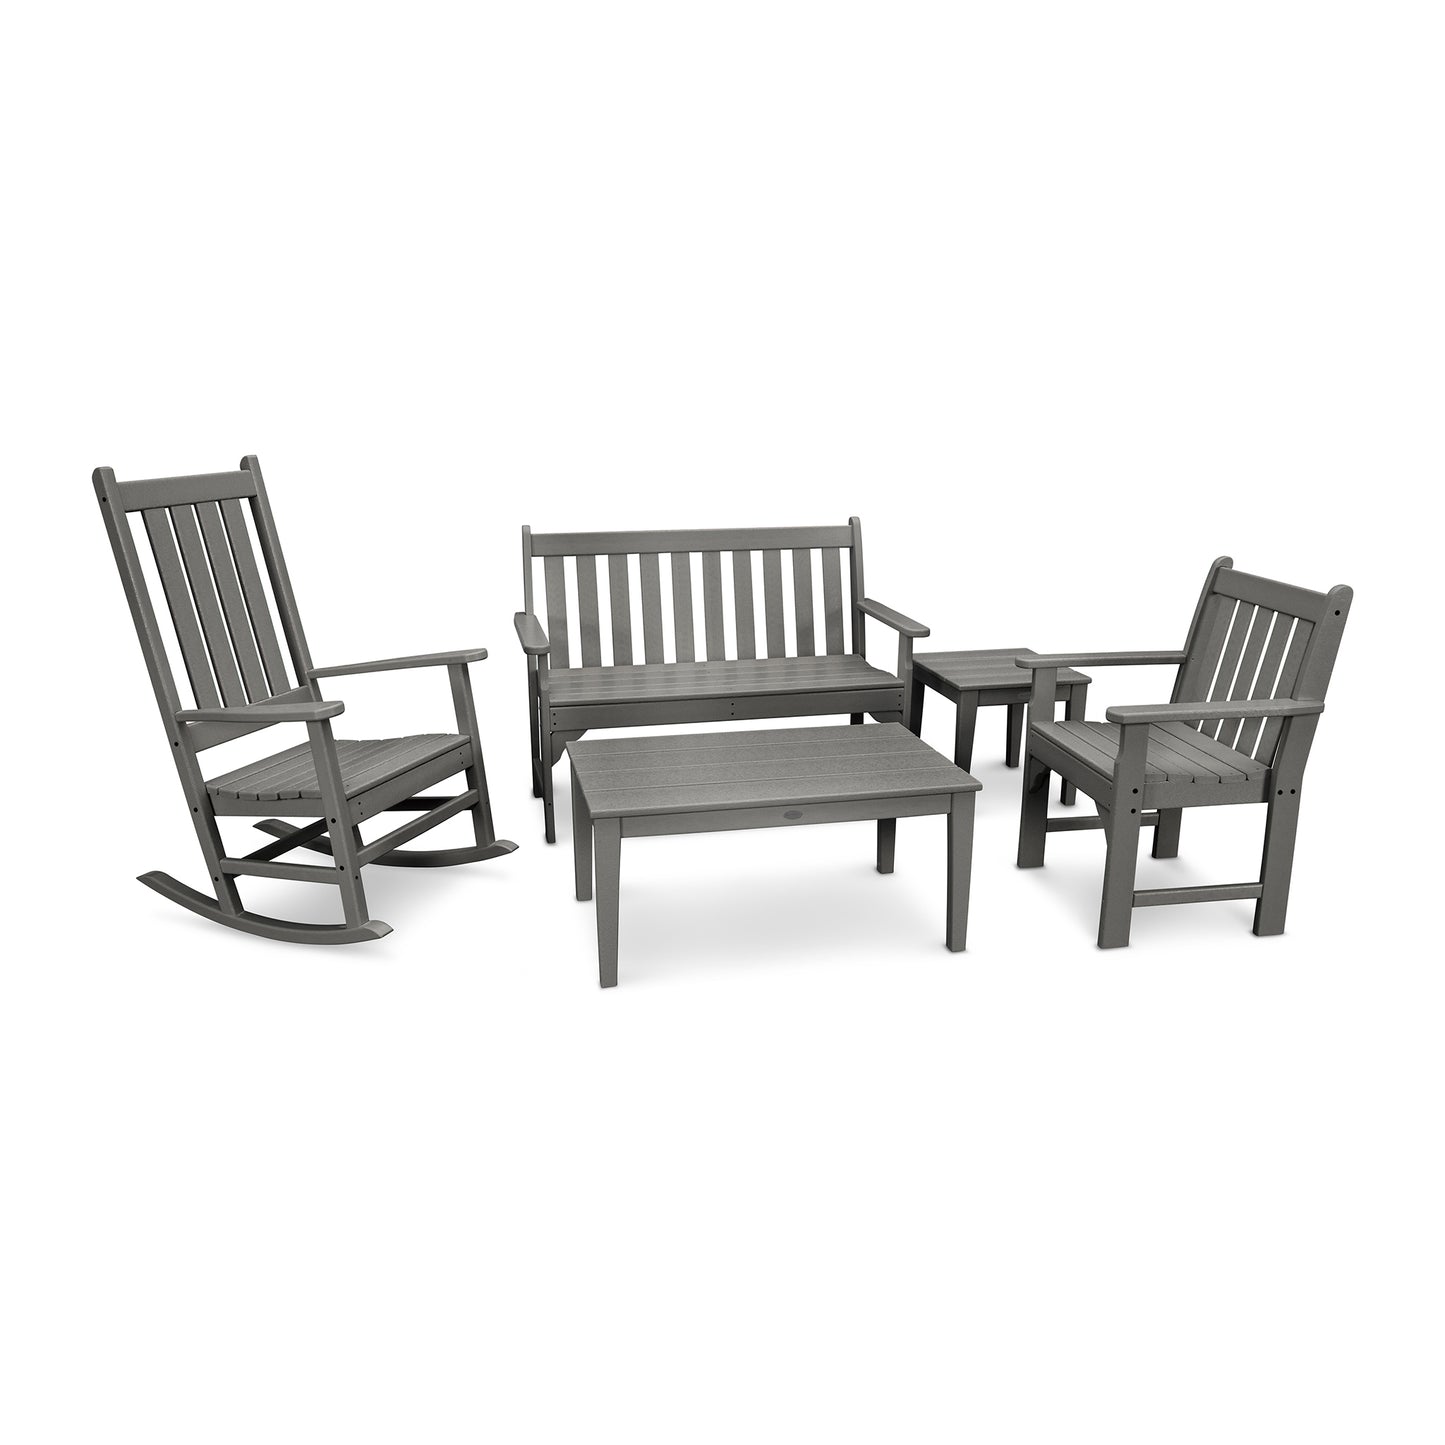 A set of POLYWOOD Vineyard 5-Piece Bench & Rocking Chair Set in gray, including a rocking chair, a bench, an armchair, and a small rectangular table, displayed on a plain white background.